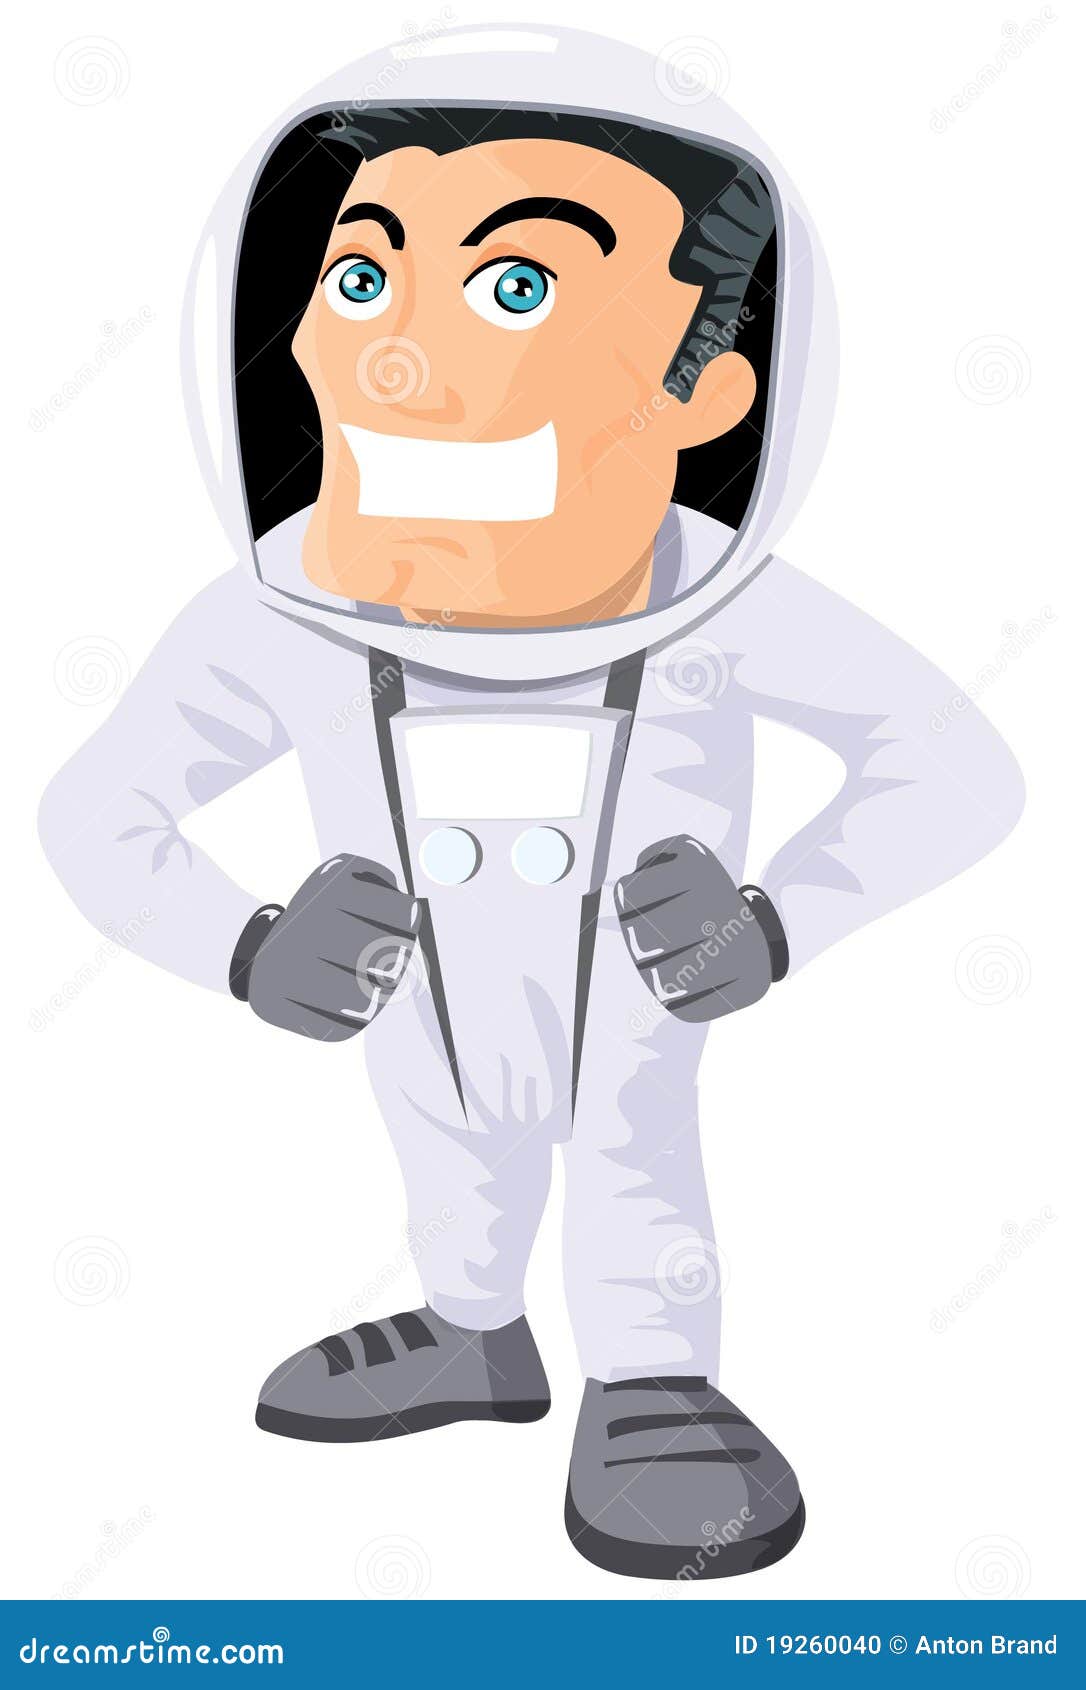 Cartoon Astronaout In A Space Suit Stock Vector - Illustration of clip